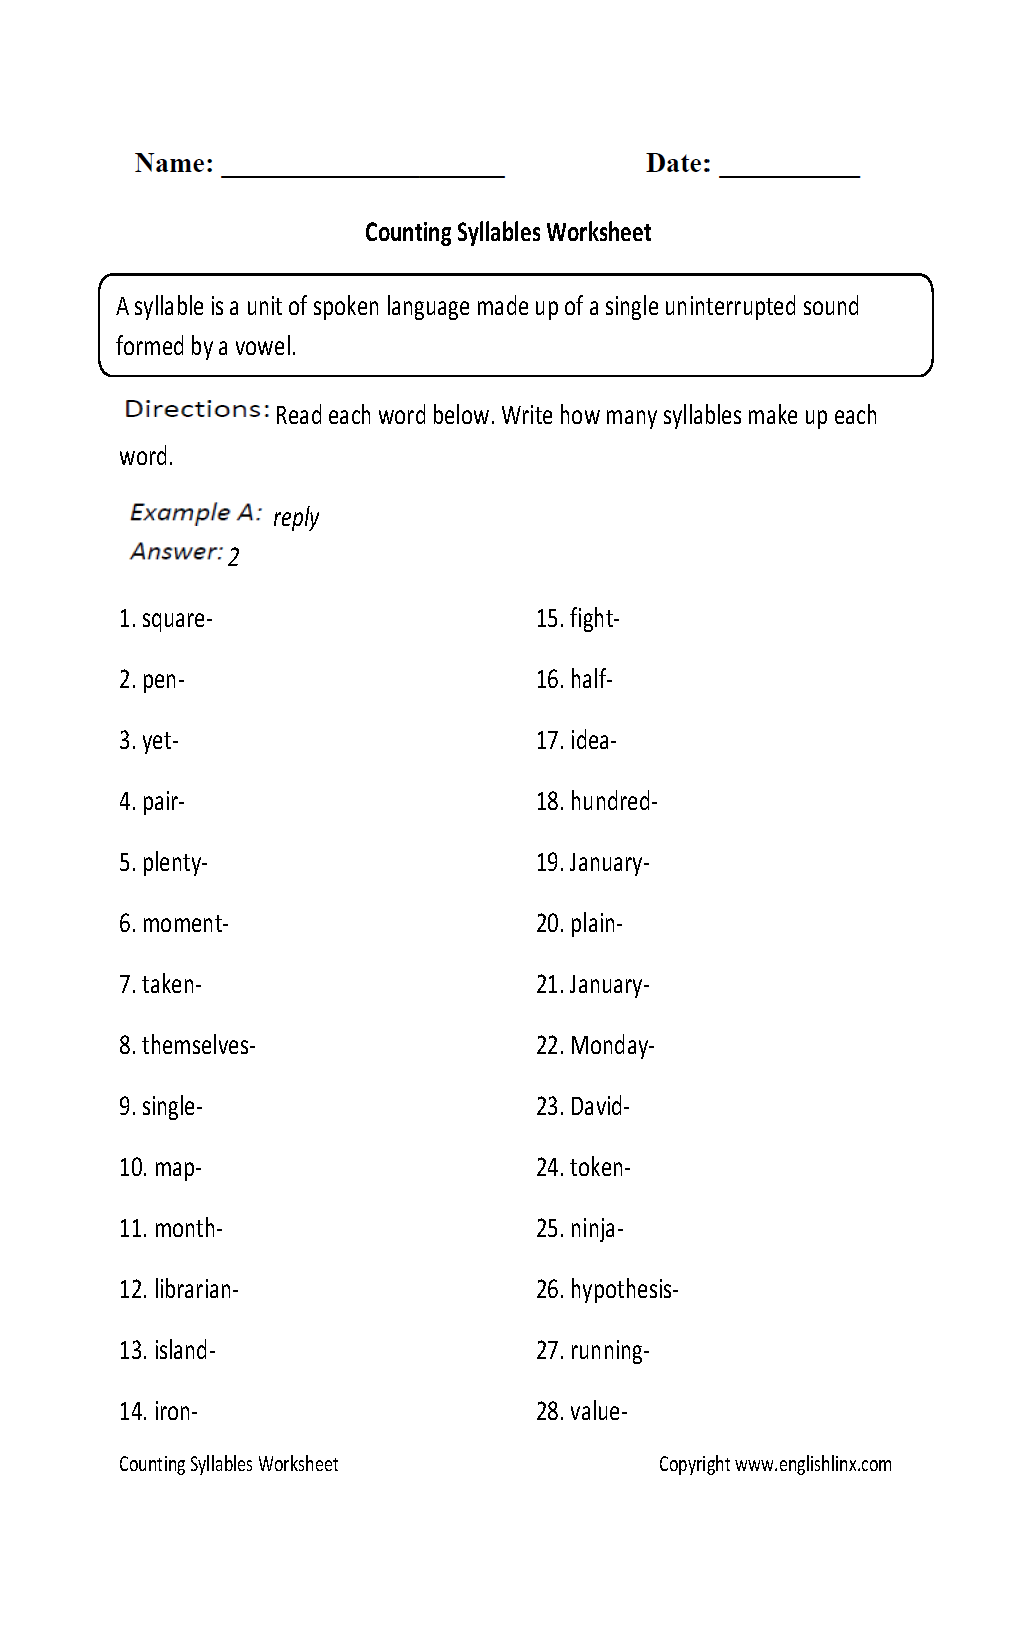 other-worksheet-category-page-646-worksheeto